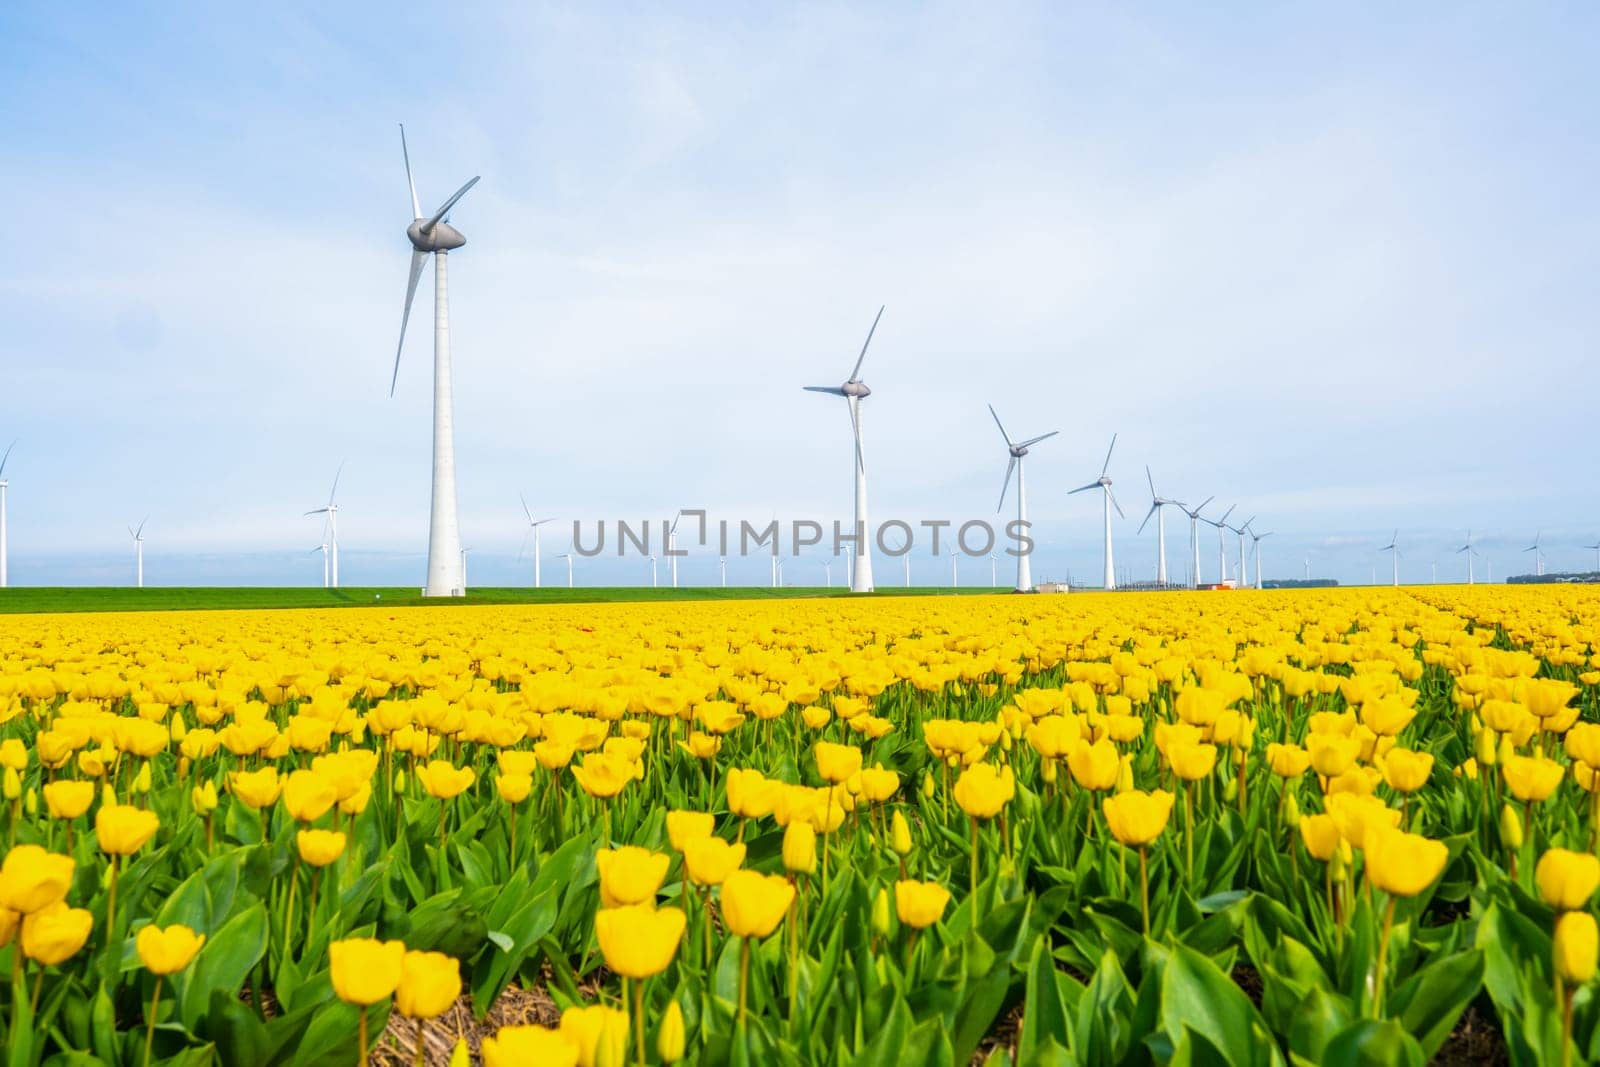 windmill park with tulip flowers in Spring, windmill turbines in the Netherlands Europe. windmill turbines in the Noordoostpolder Flevoland, yellow tulip field in Springtime on a sunny day